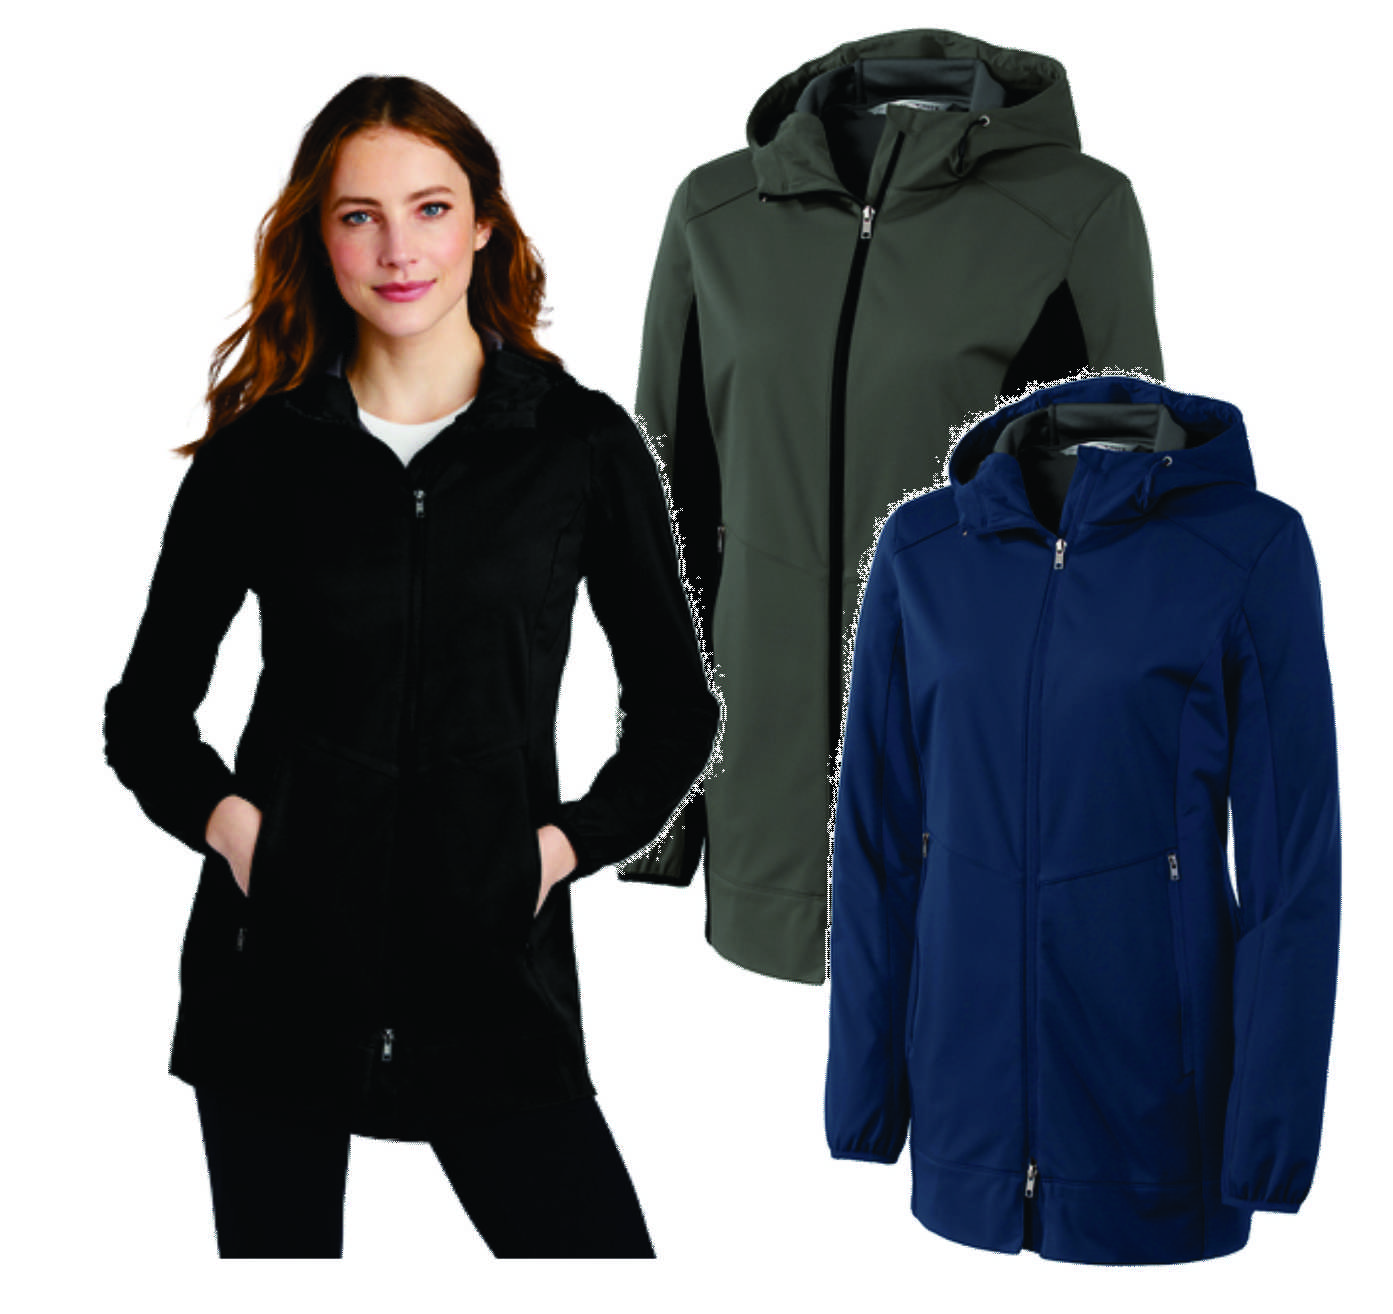 Girls Hood Jackets - Buy Girls Hooded Jackets Online Starting from Rs. 359  from Myntra